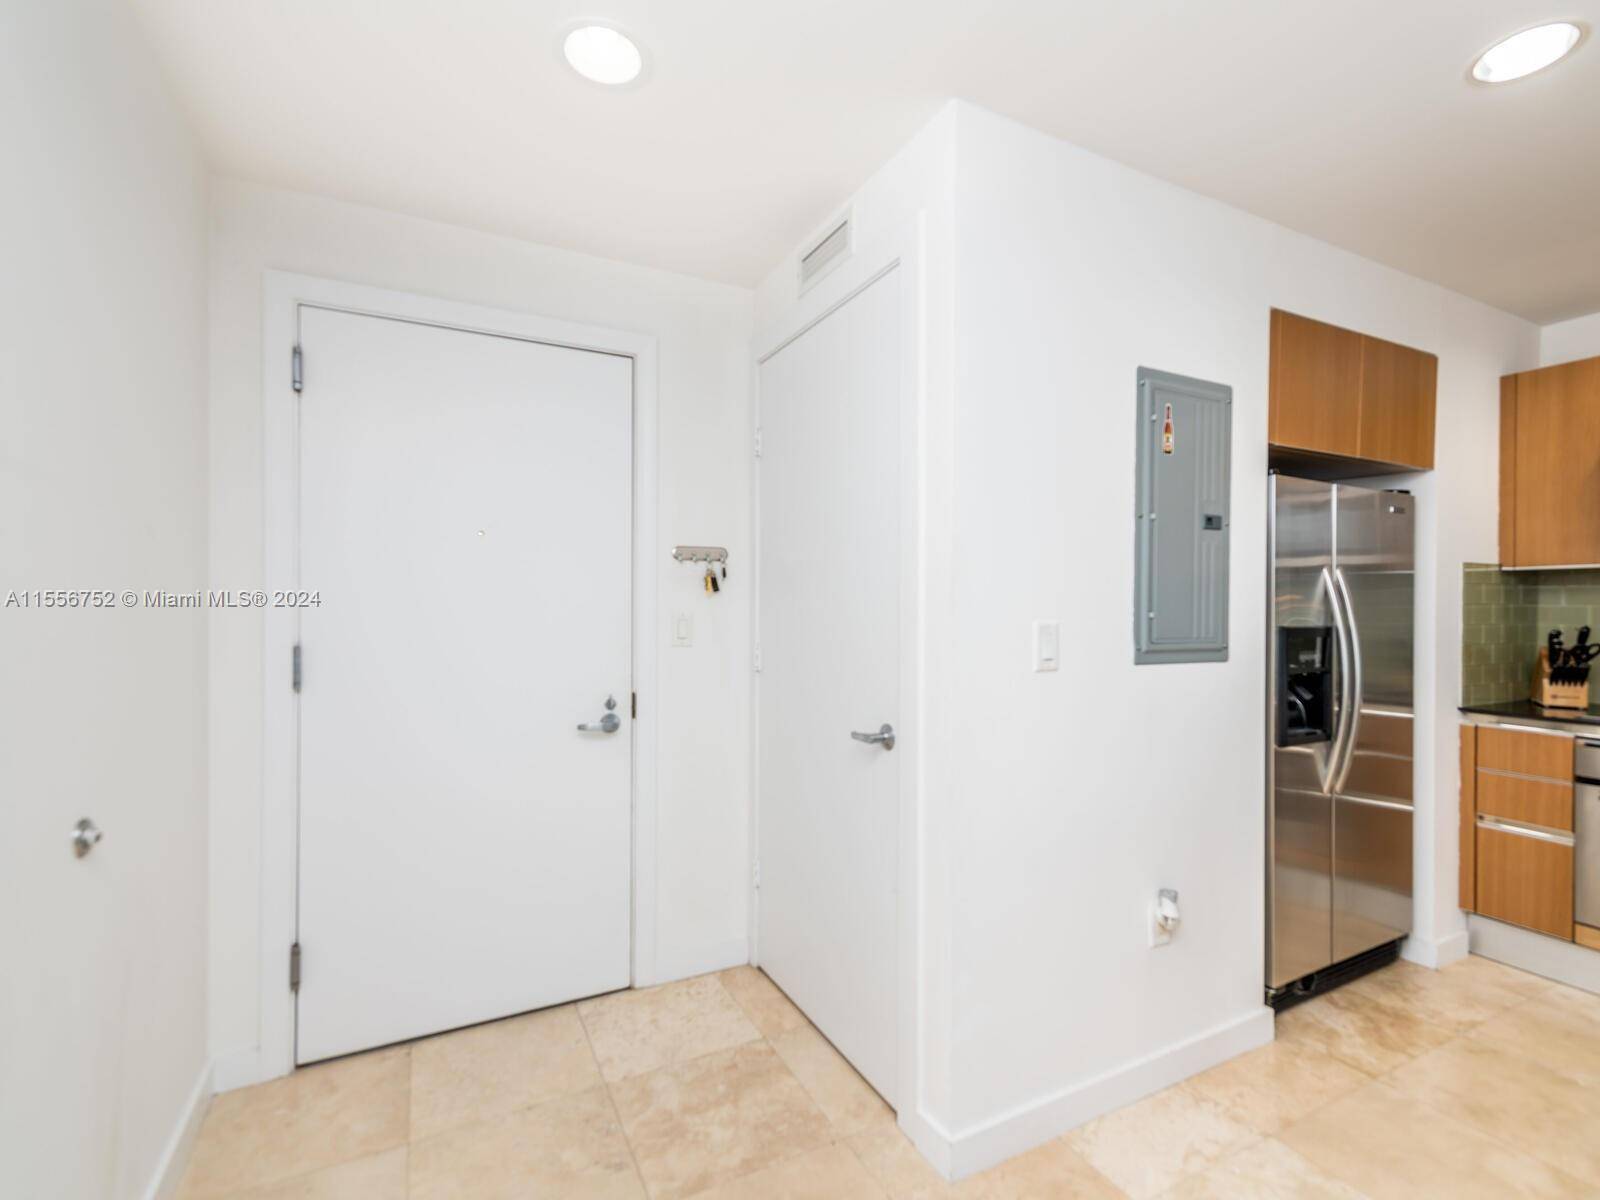 Beautiful 1 bedroom 1 bath unit with amazing East view, located in the heart of Brickell Avenue.